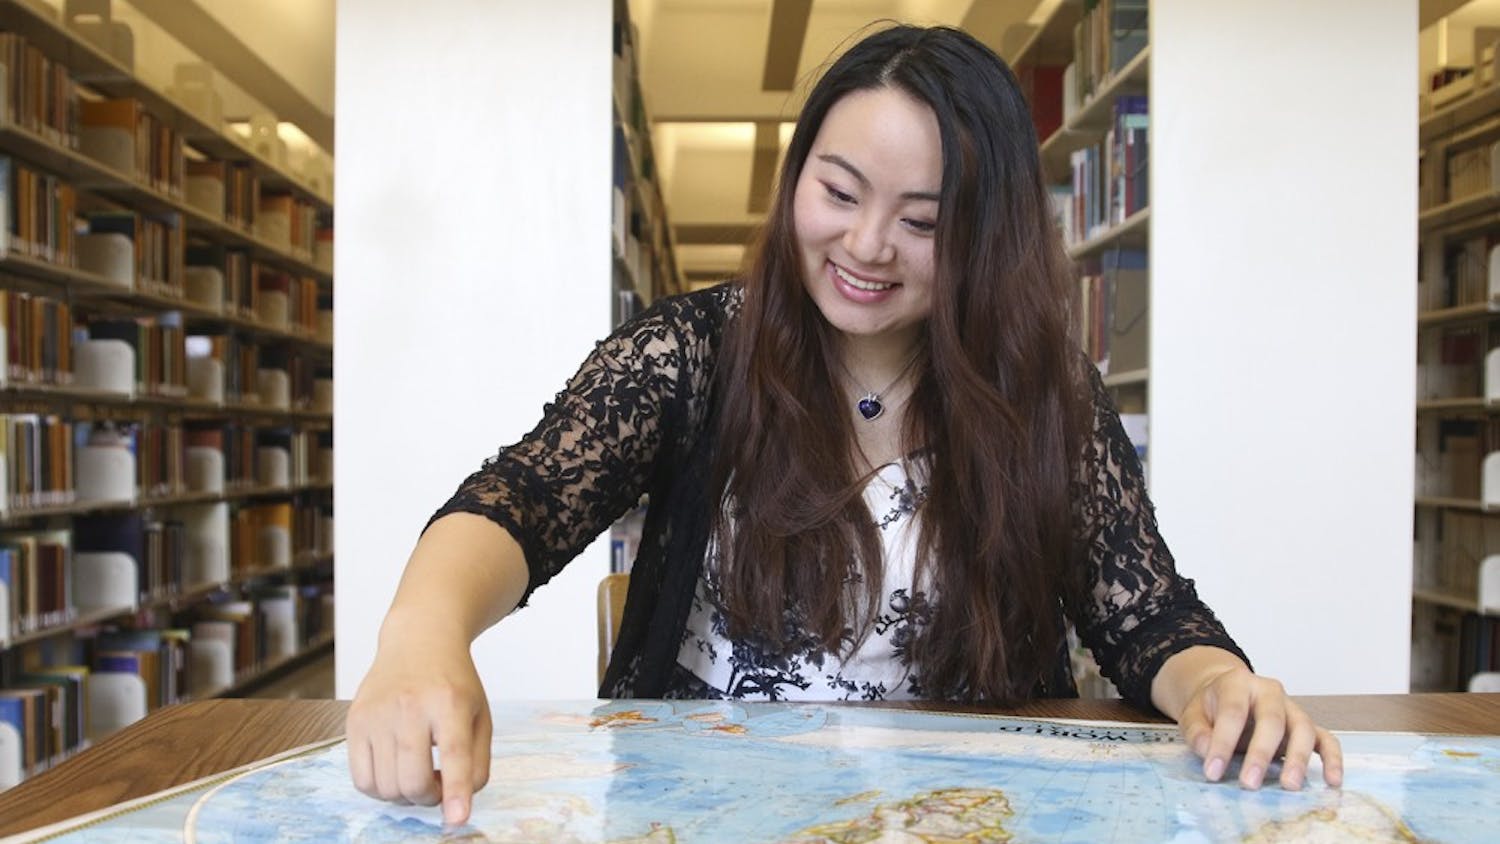 Sophie Niu, a junior international student from Shenzhen, China, is the president of Chinese Students and Scholars.